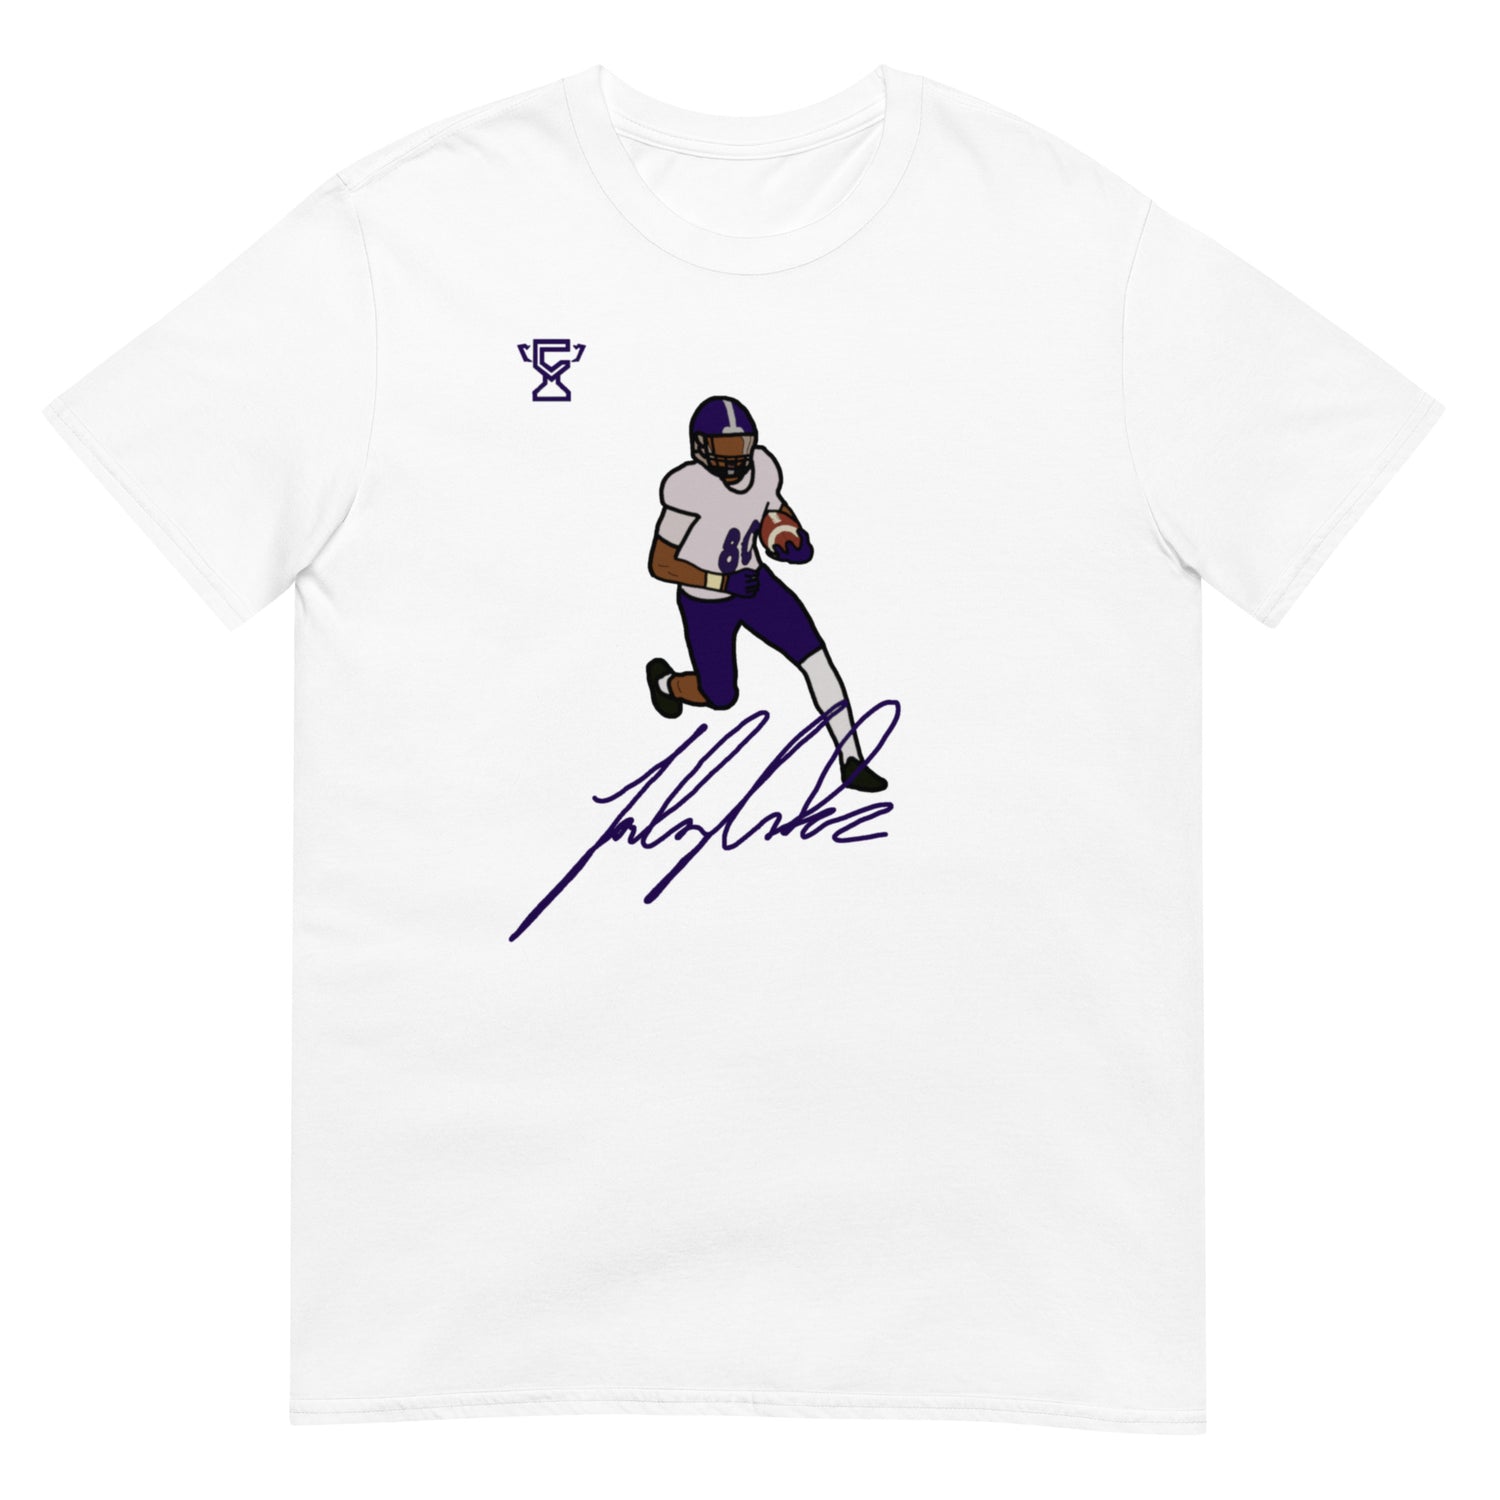 White t-shirt with the signature and artwork of Jalen Coker along with the Champletes logo.